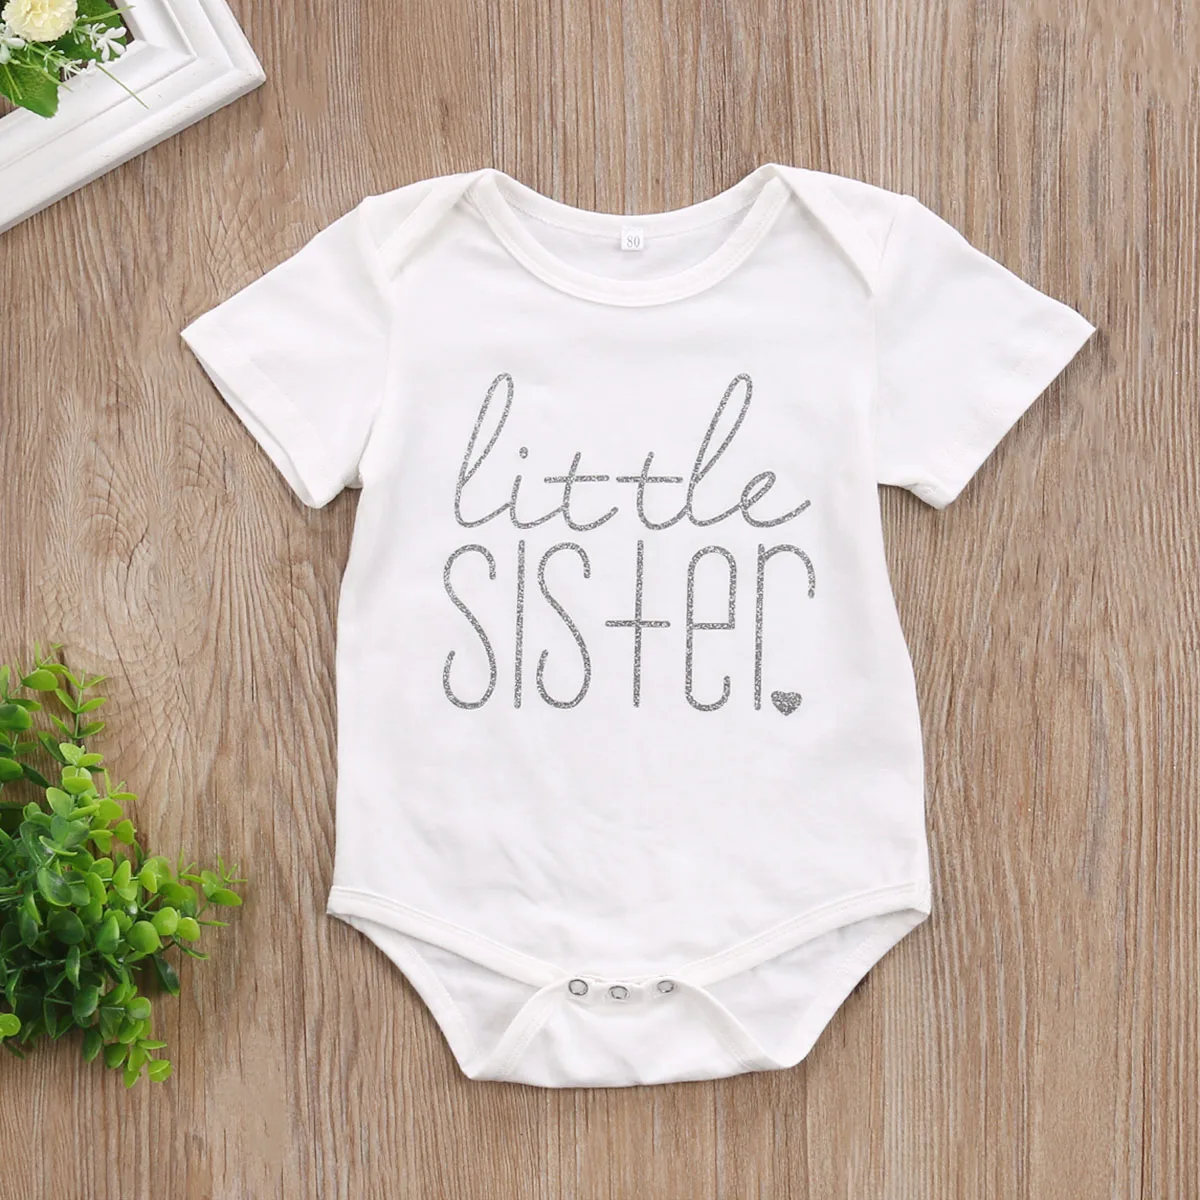 on brand DANDANdianzi Little Sister Big Brother Family Matching Cotton baby rompers Outfits Little Sister Romper Big Brother Printed Tops Cotton Outfits